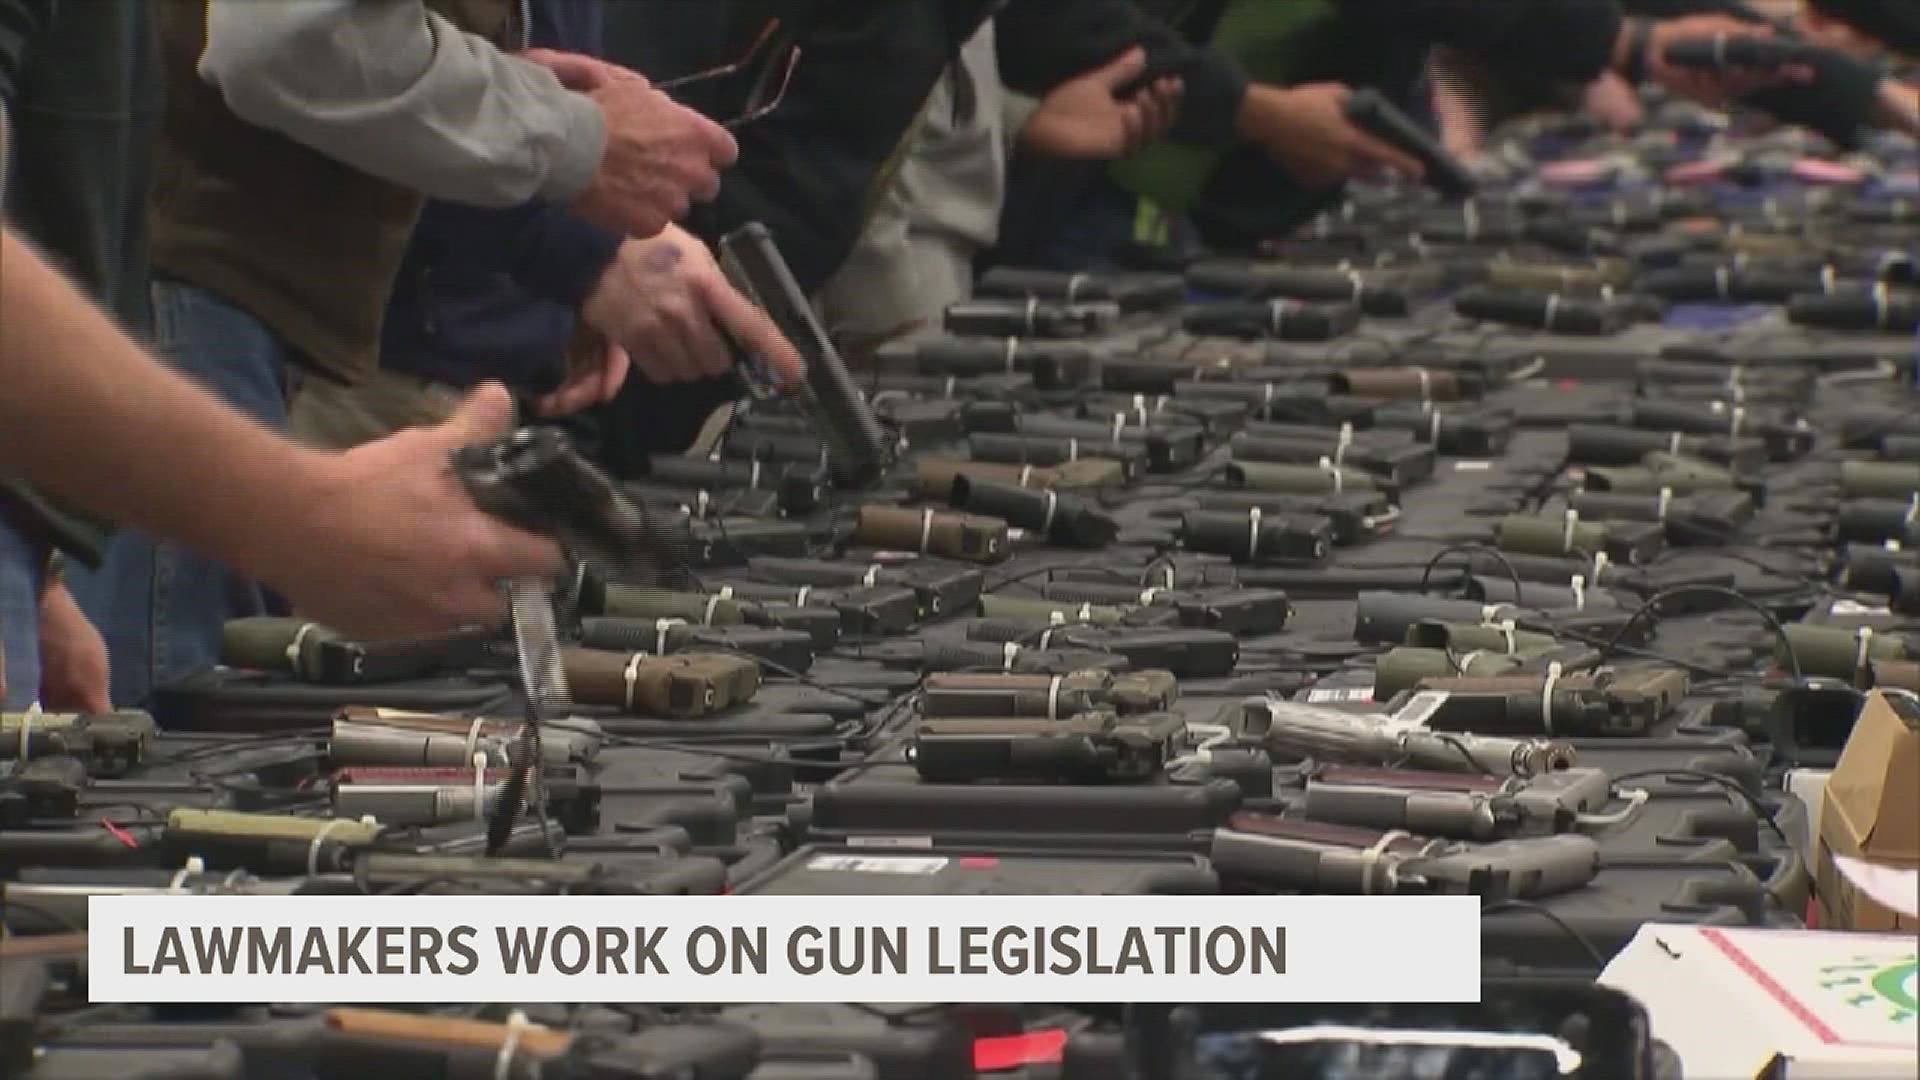 The top proposals include background checks on gun stores, gun shows and online sales.